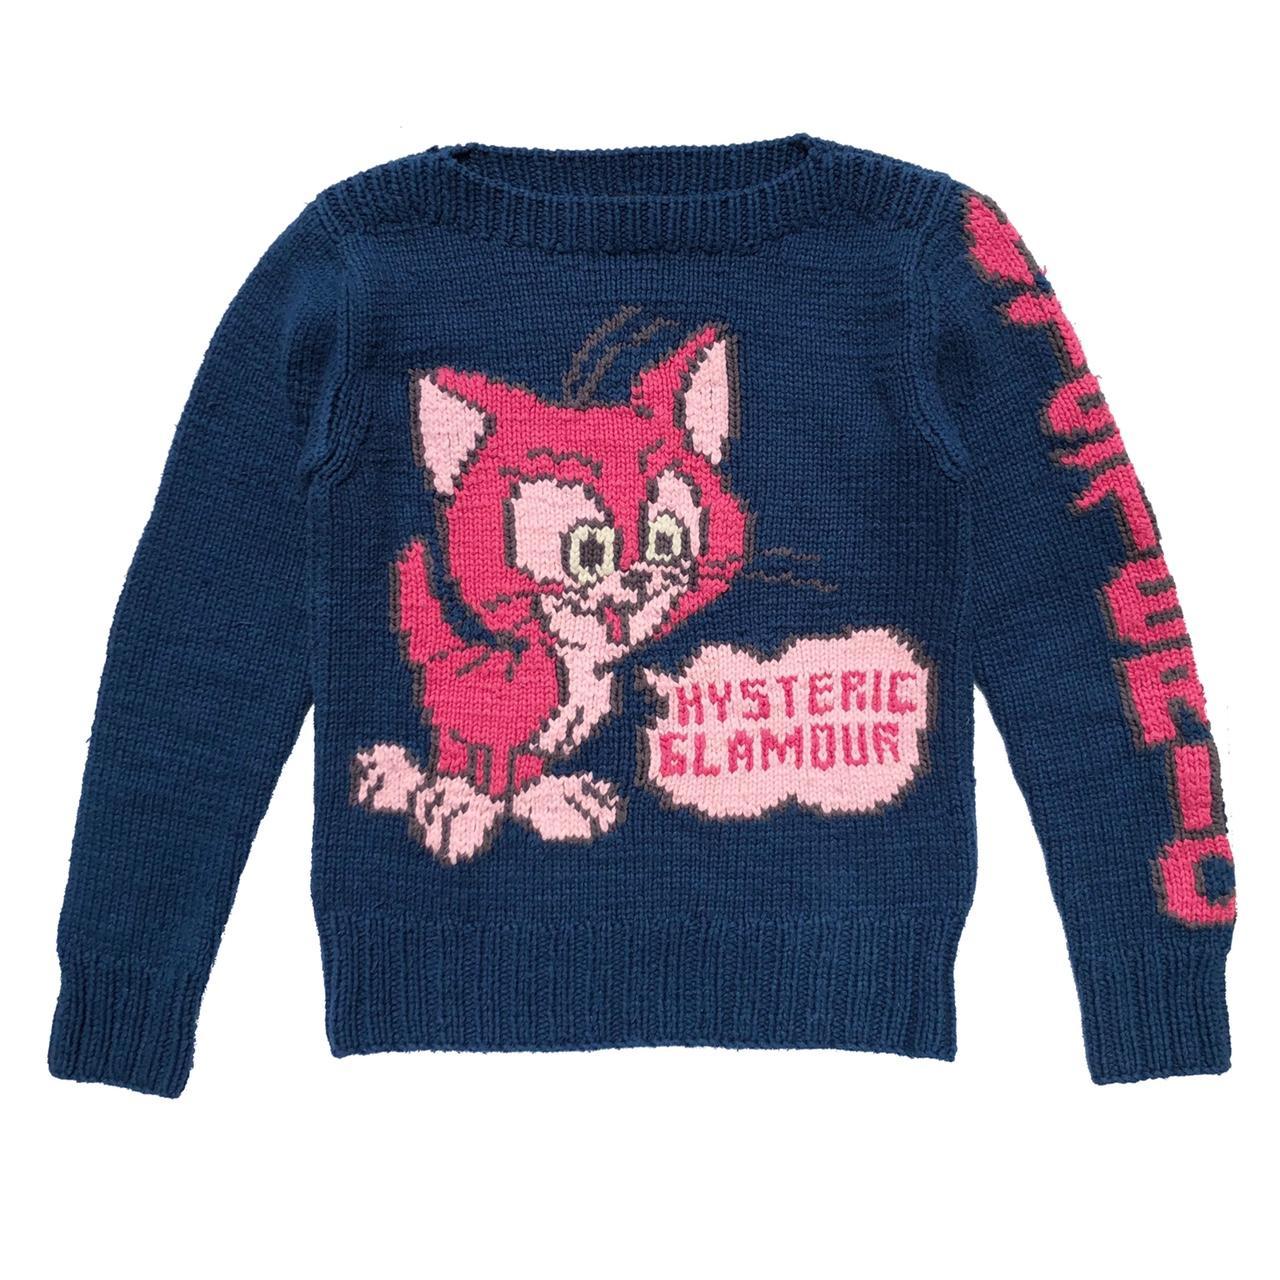 Hysteric Glamour Men's Blue and Pink Jumper